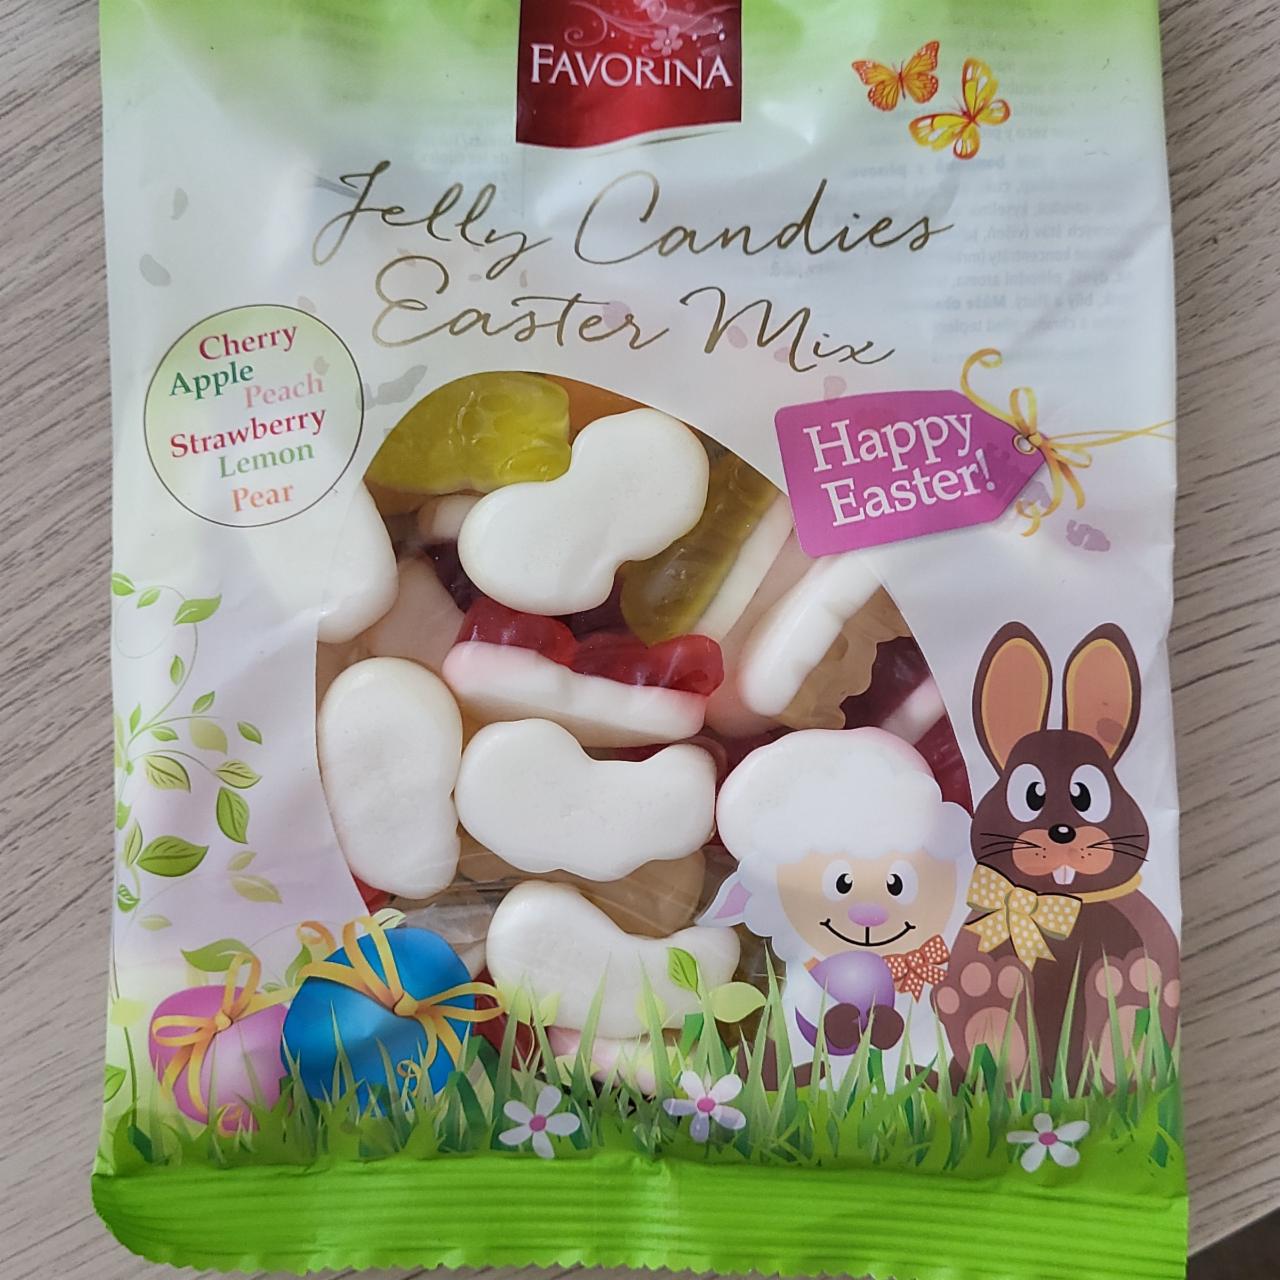 Fotografie - Jelly Candies Easter Mix Favorina